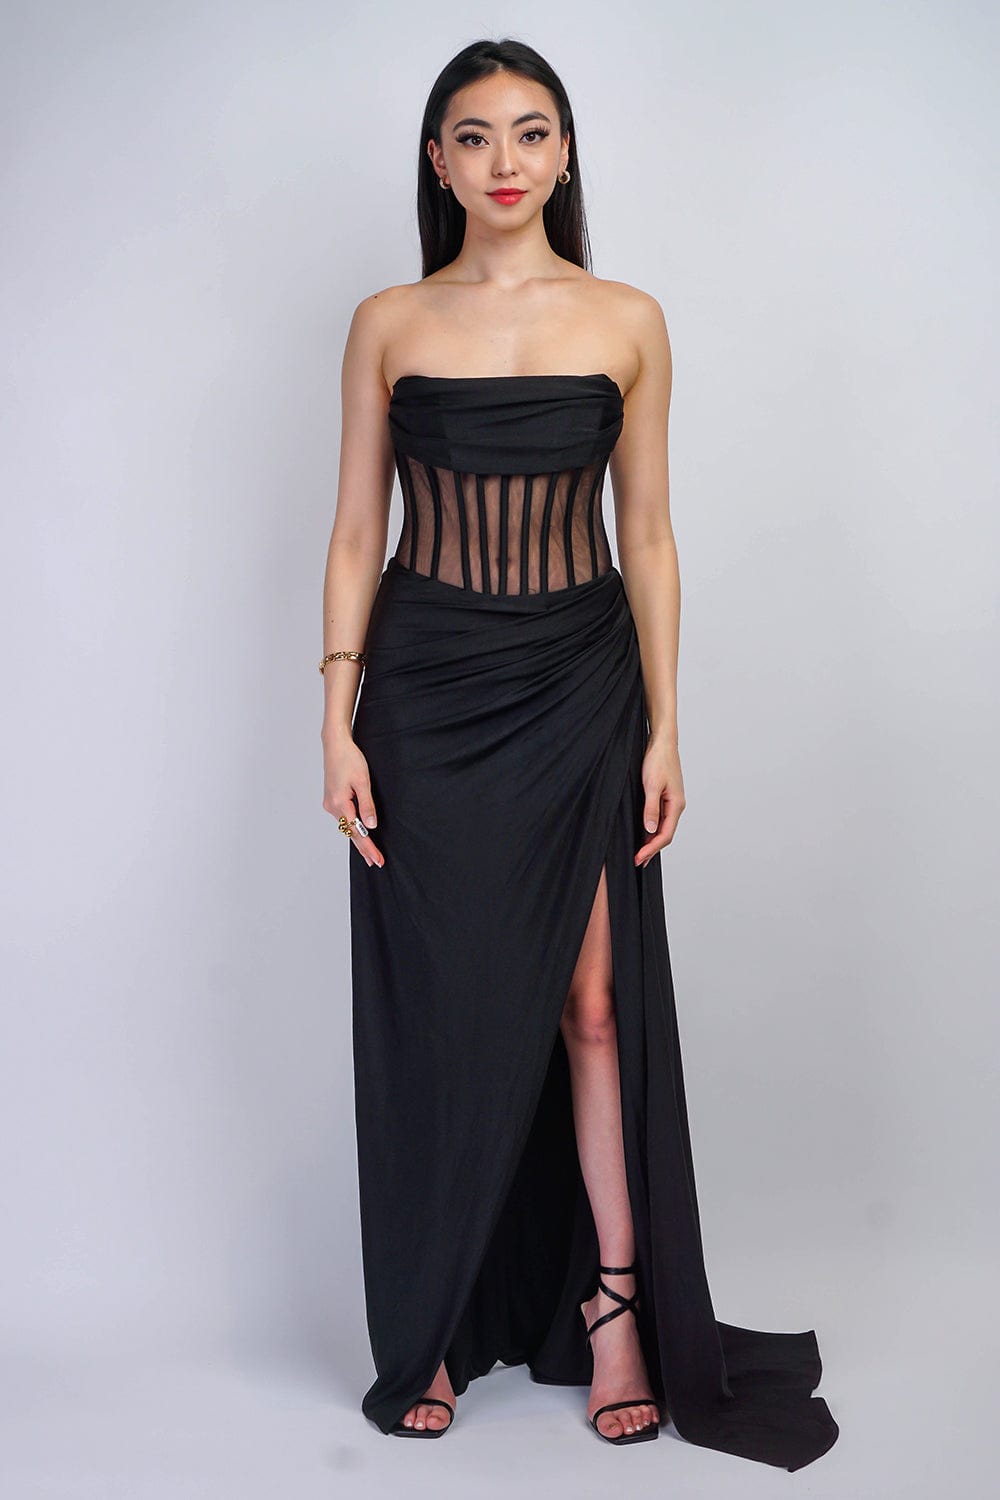 DCD GOWNS Black Strapless Corset Gown